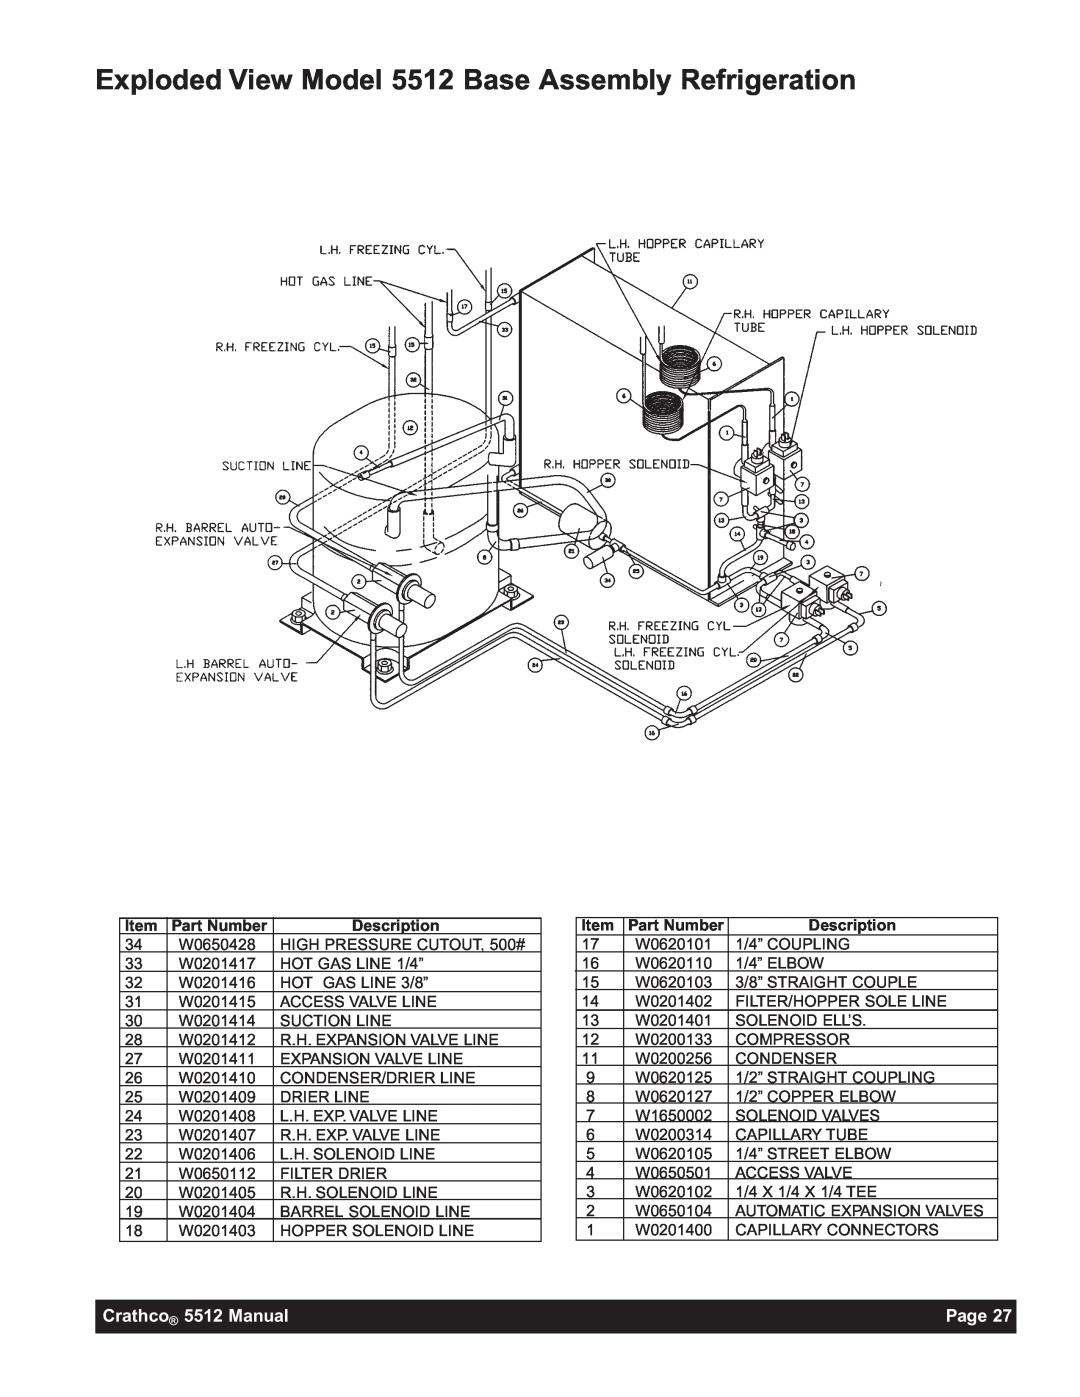 Grindmaster 5512E instruction manual Exploded View Model 5512 Base Assembly Refrigeration, Crathco 5512 Manual, Page 